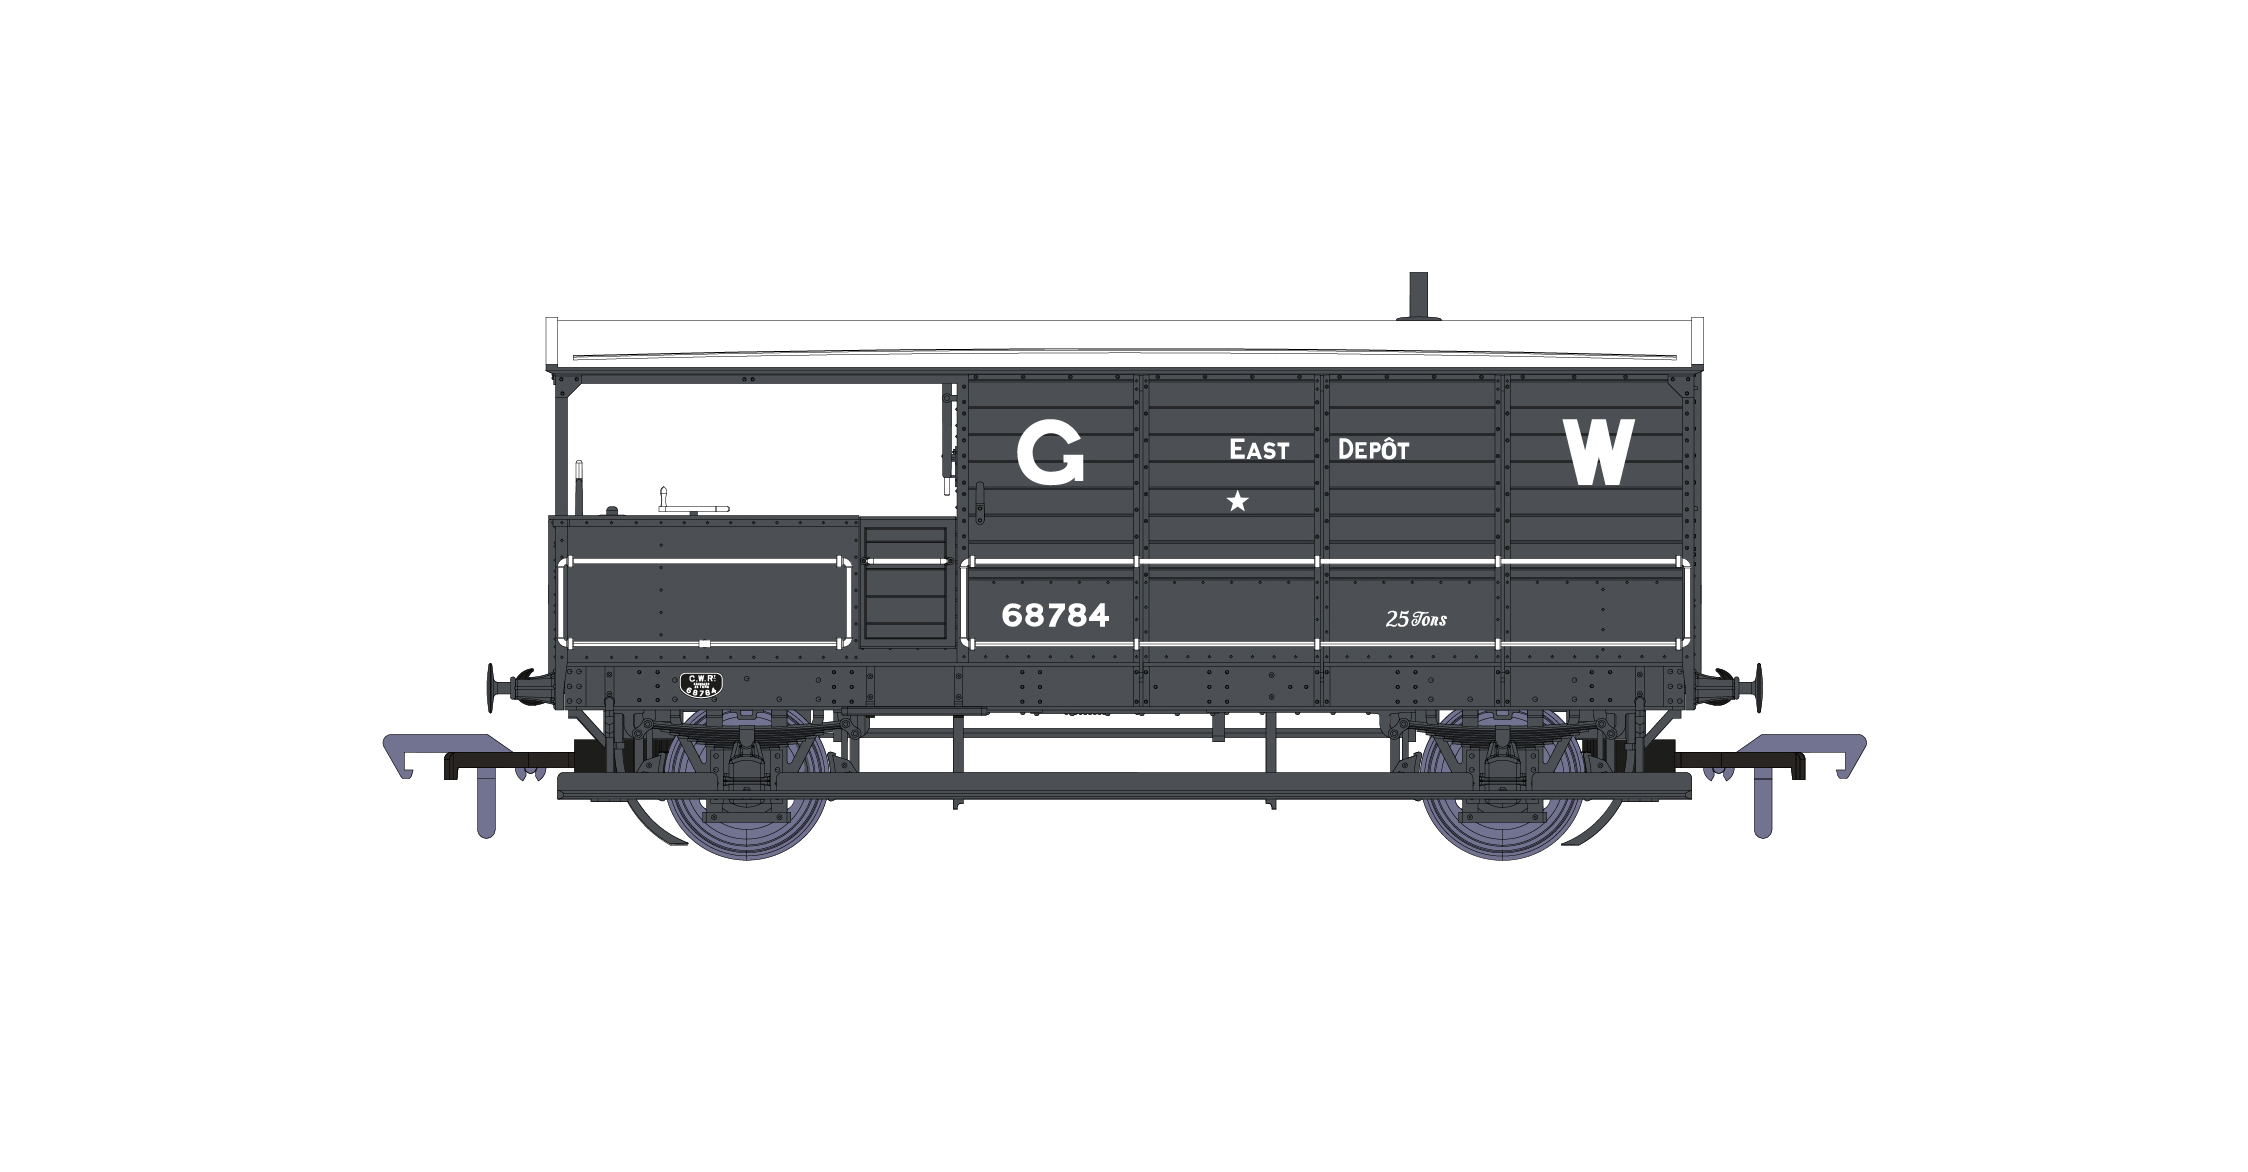 Rapido Trains 918003 GWR Dia. AA20 ‘Toad’ No. 68784, East Depot, GW grey (large)